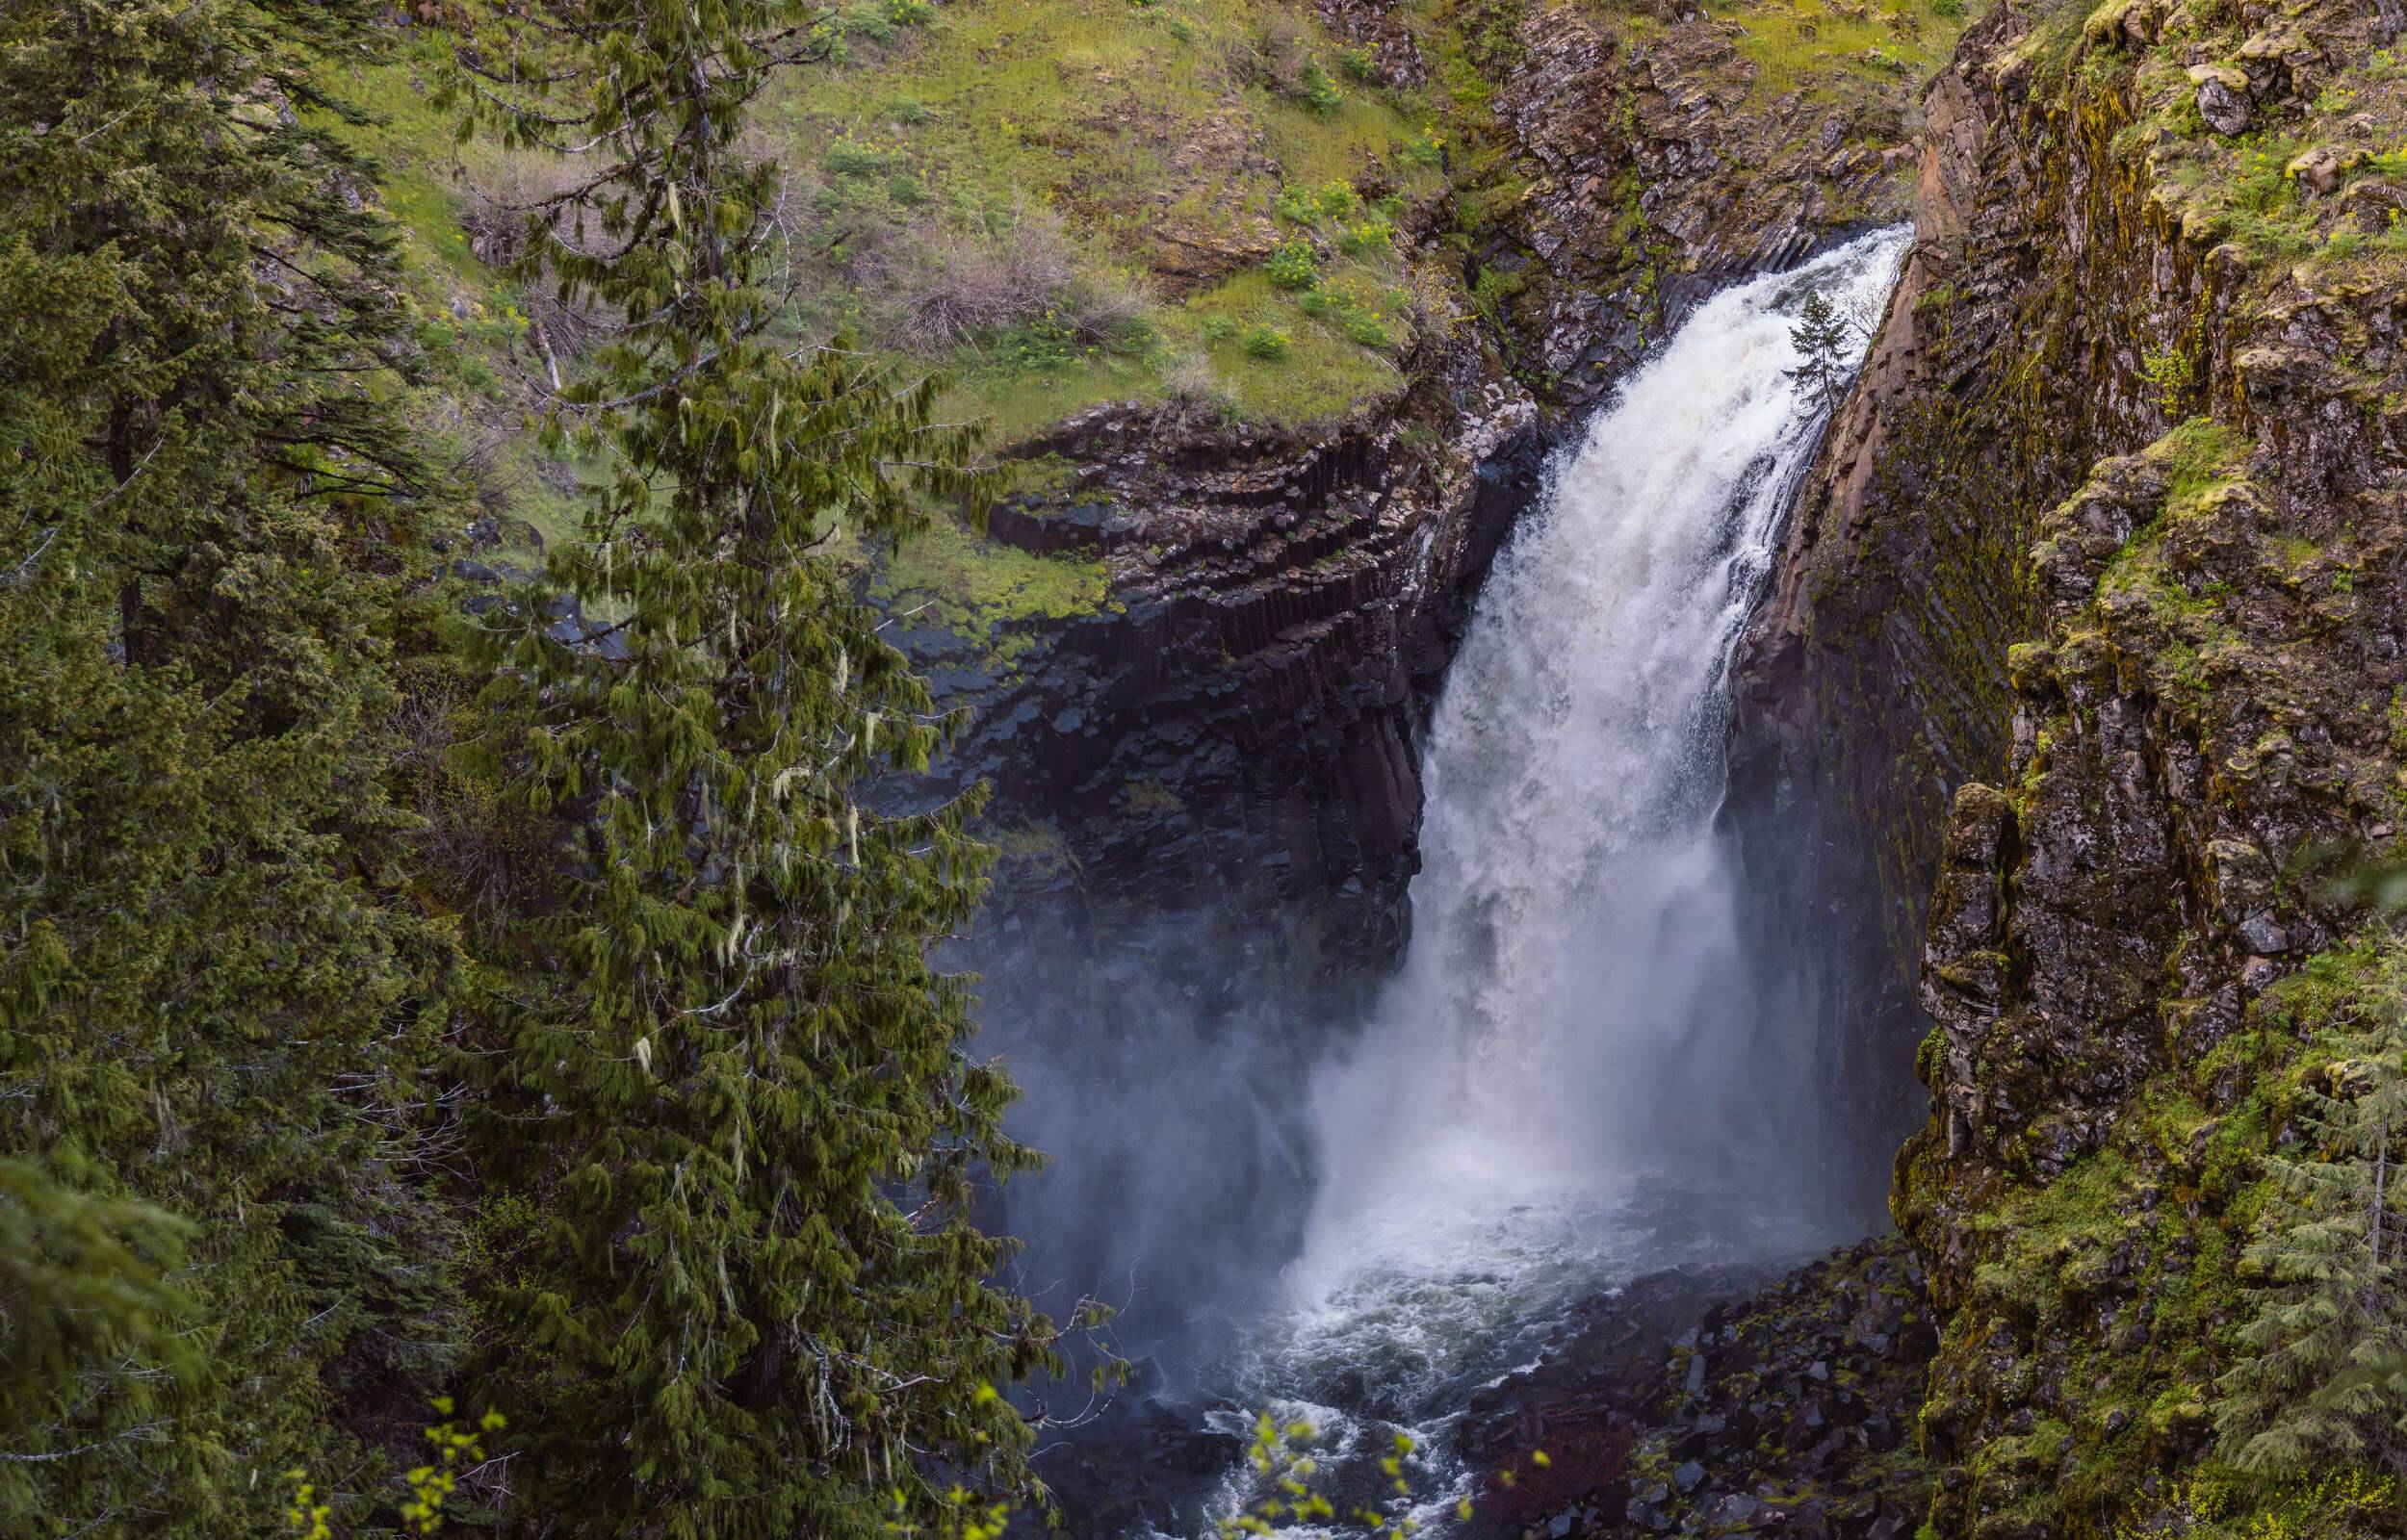 An overhead shot of Lower Elk Creek Falls with forested area around.